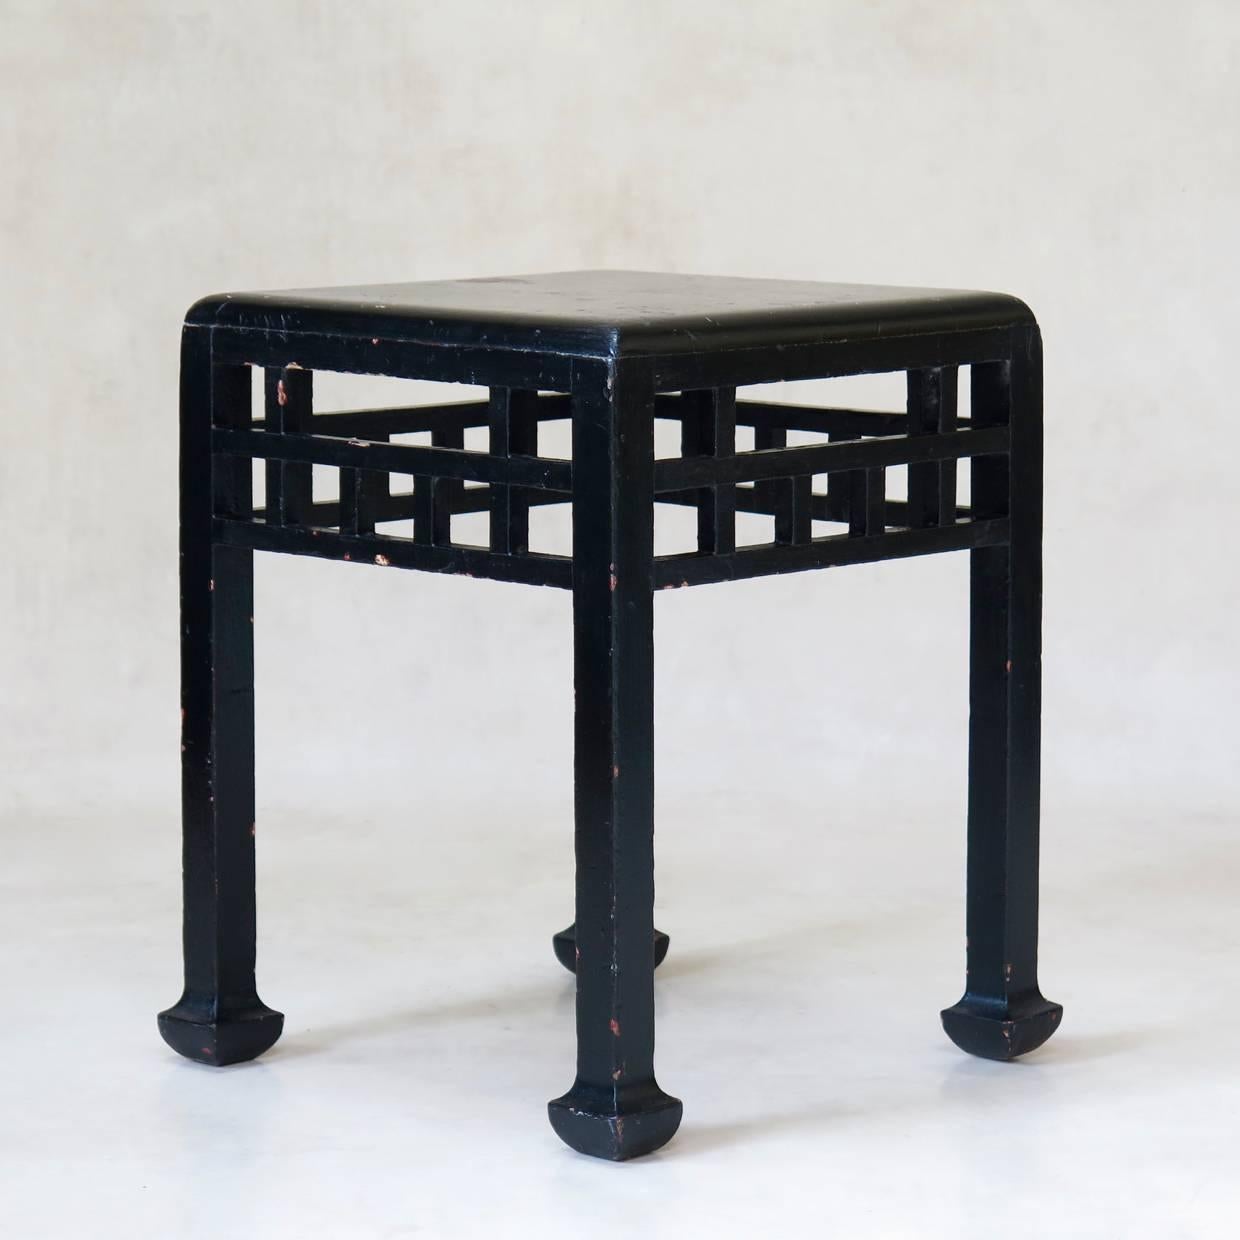 Very nice stool in the Chinese taste, with a latticed apron and ending in pretty feet. Painted black (red paint is visible beneath in small areas).

Attributed to Atelier Martine (Paul Poiret).